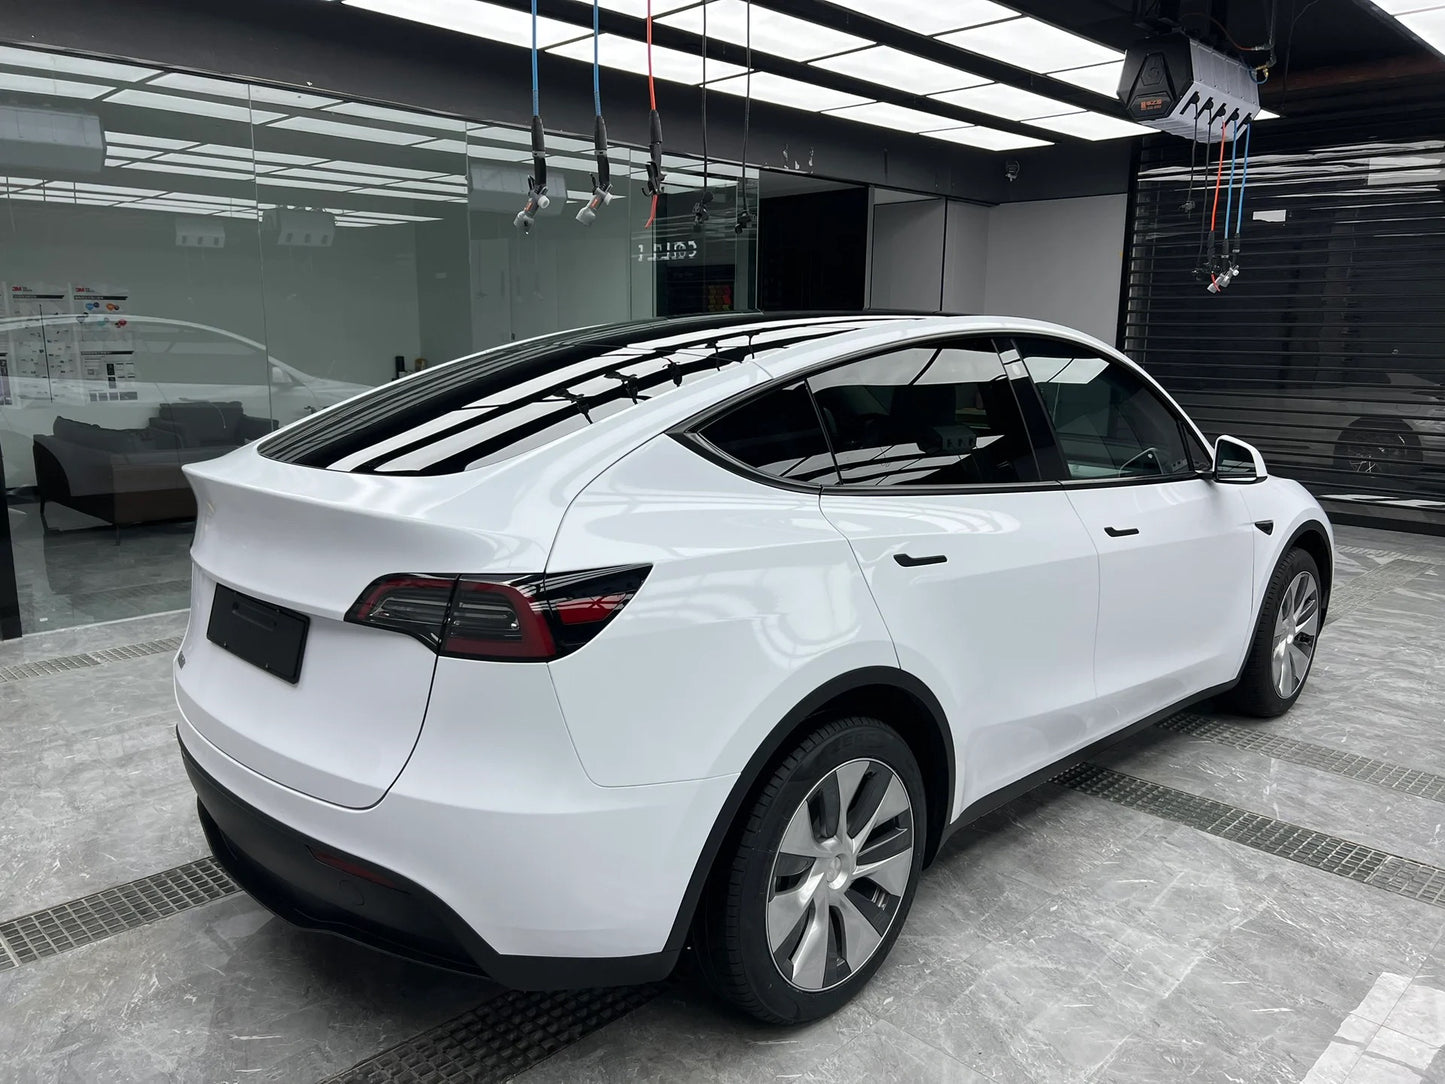 Carlori Pearl White Vinyl Wrap without bubbles, suitable for whole vehicle  wrapping